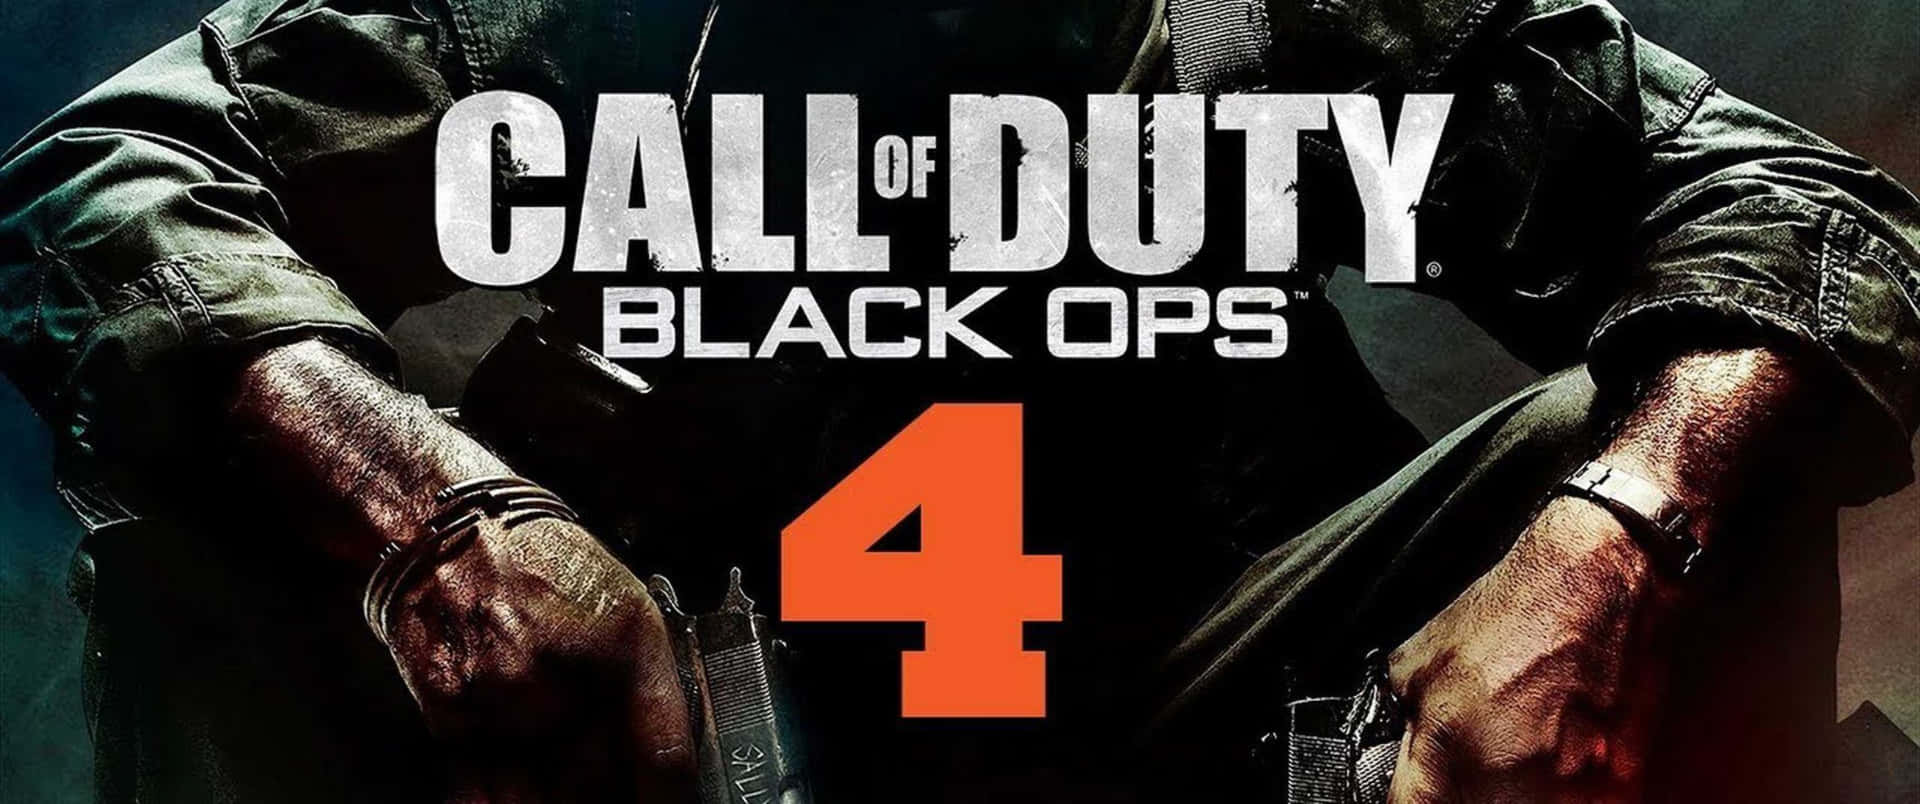 Enjoy the thrill of Call of Duty Black Ops 4 in Ultra HD Resolution